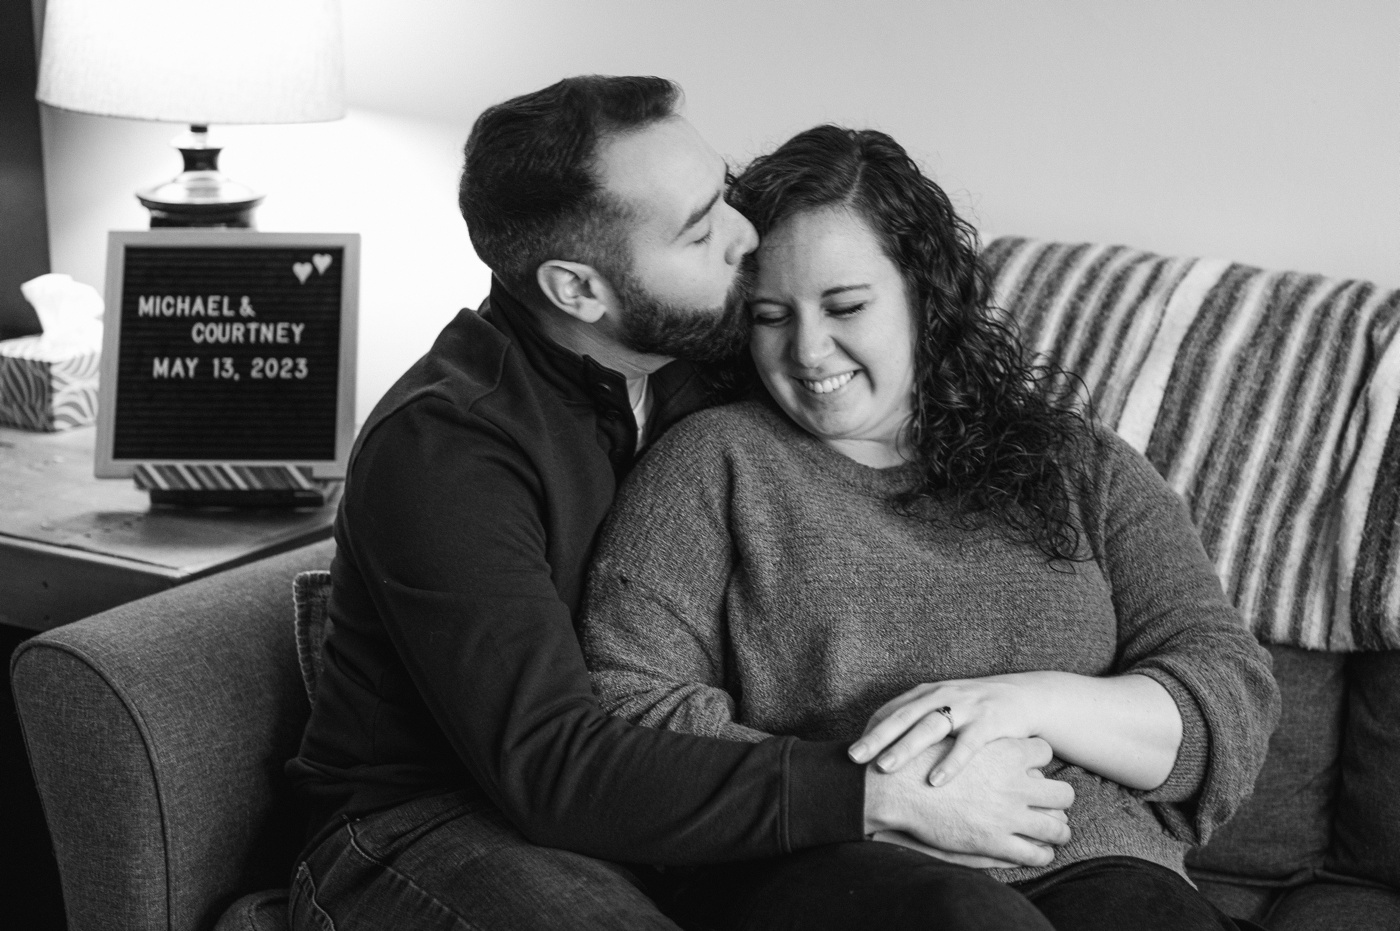 Black and white engagement photos